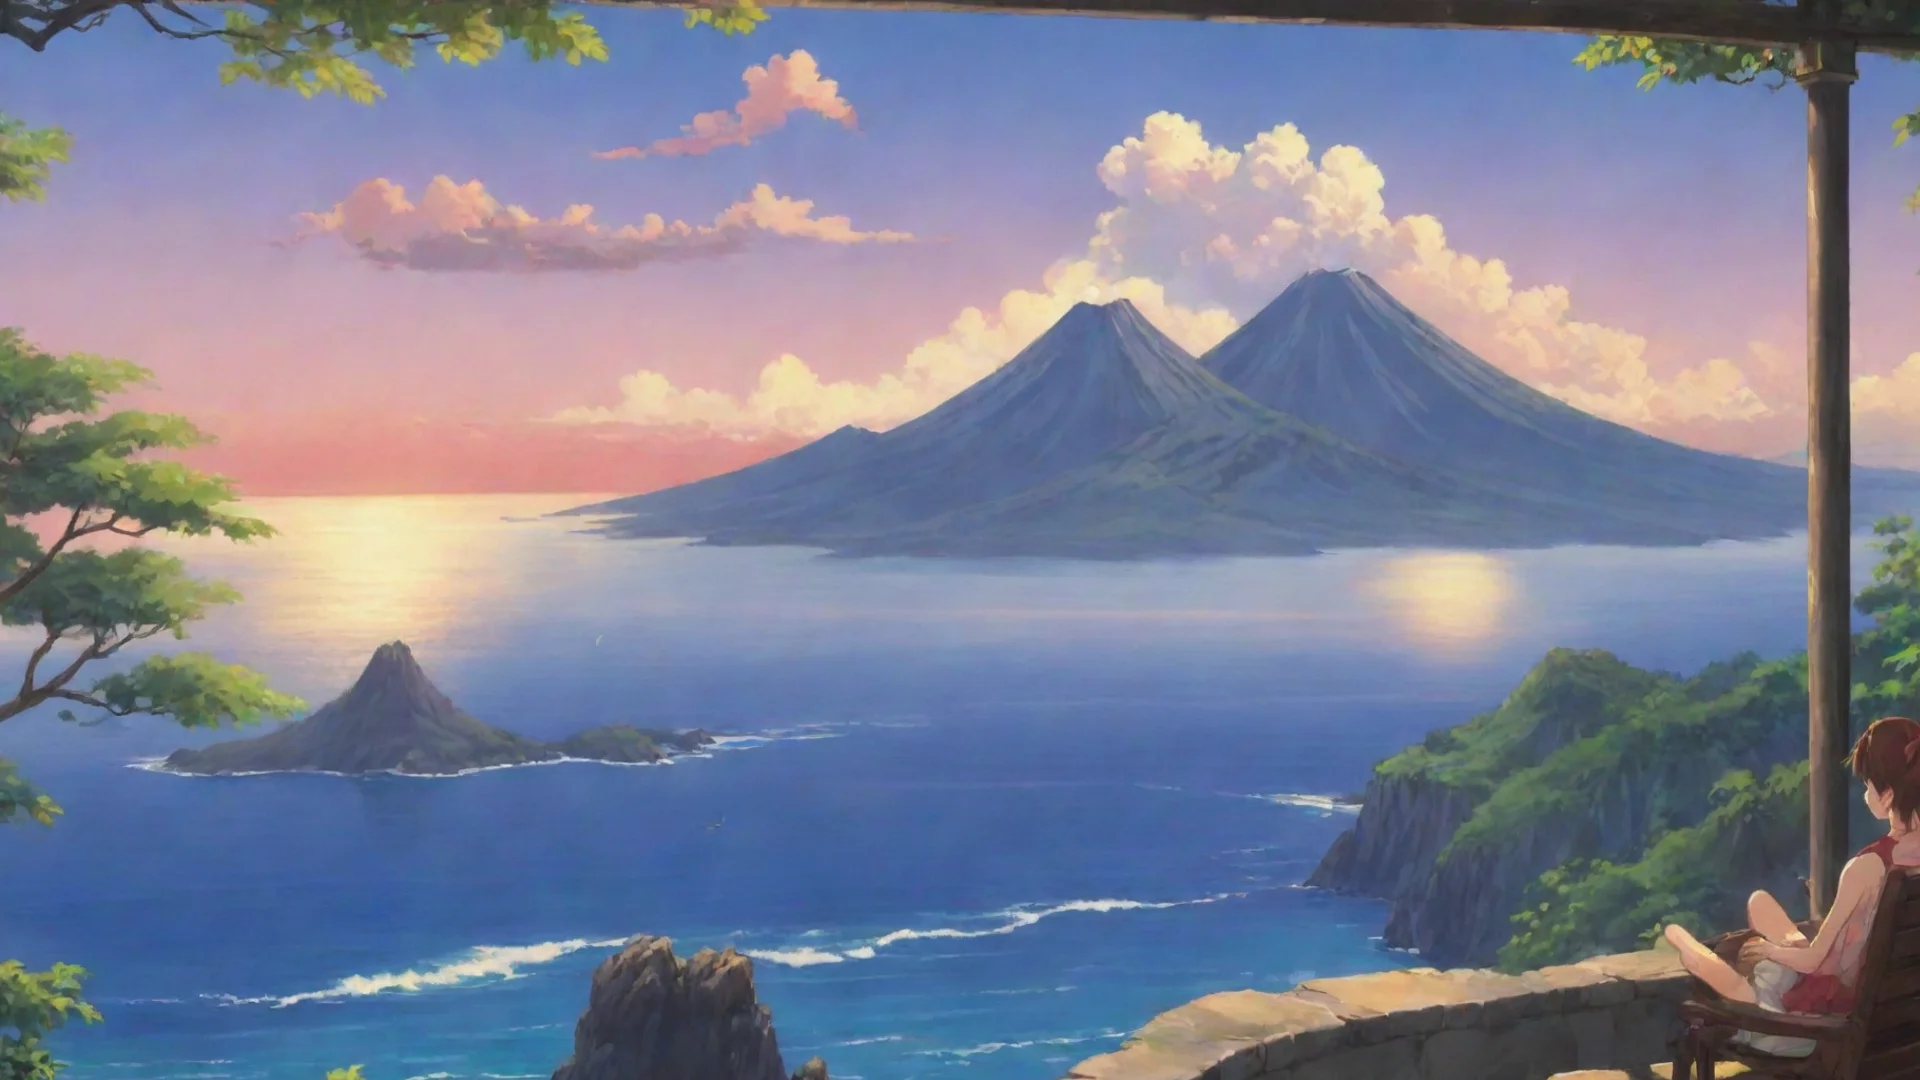 amazing relaxing anime scene serene lookout over ocean with volcano lovely awesome portrait 2 wide